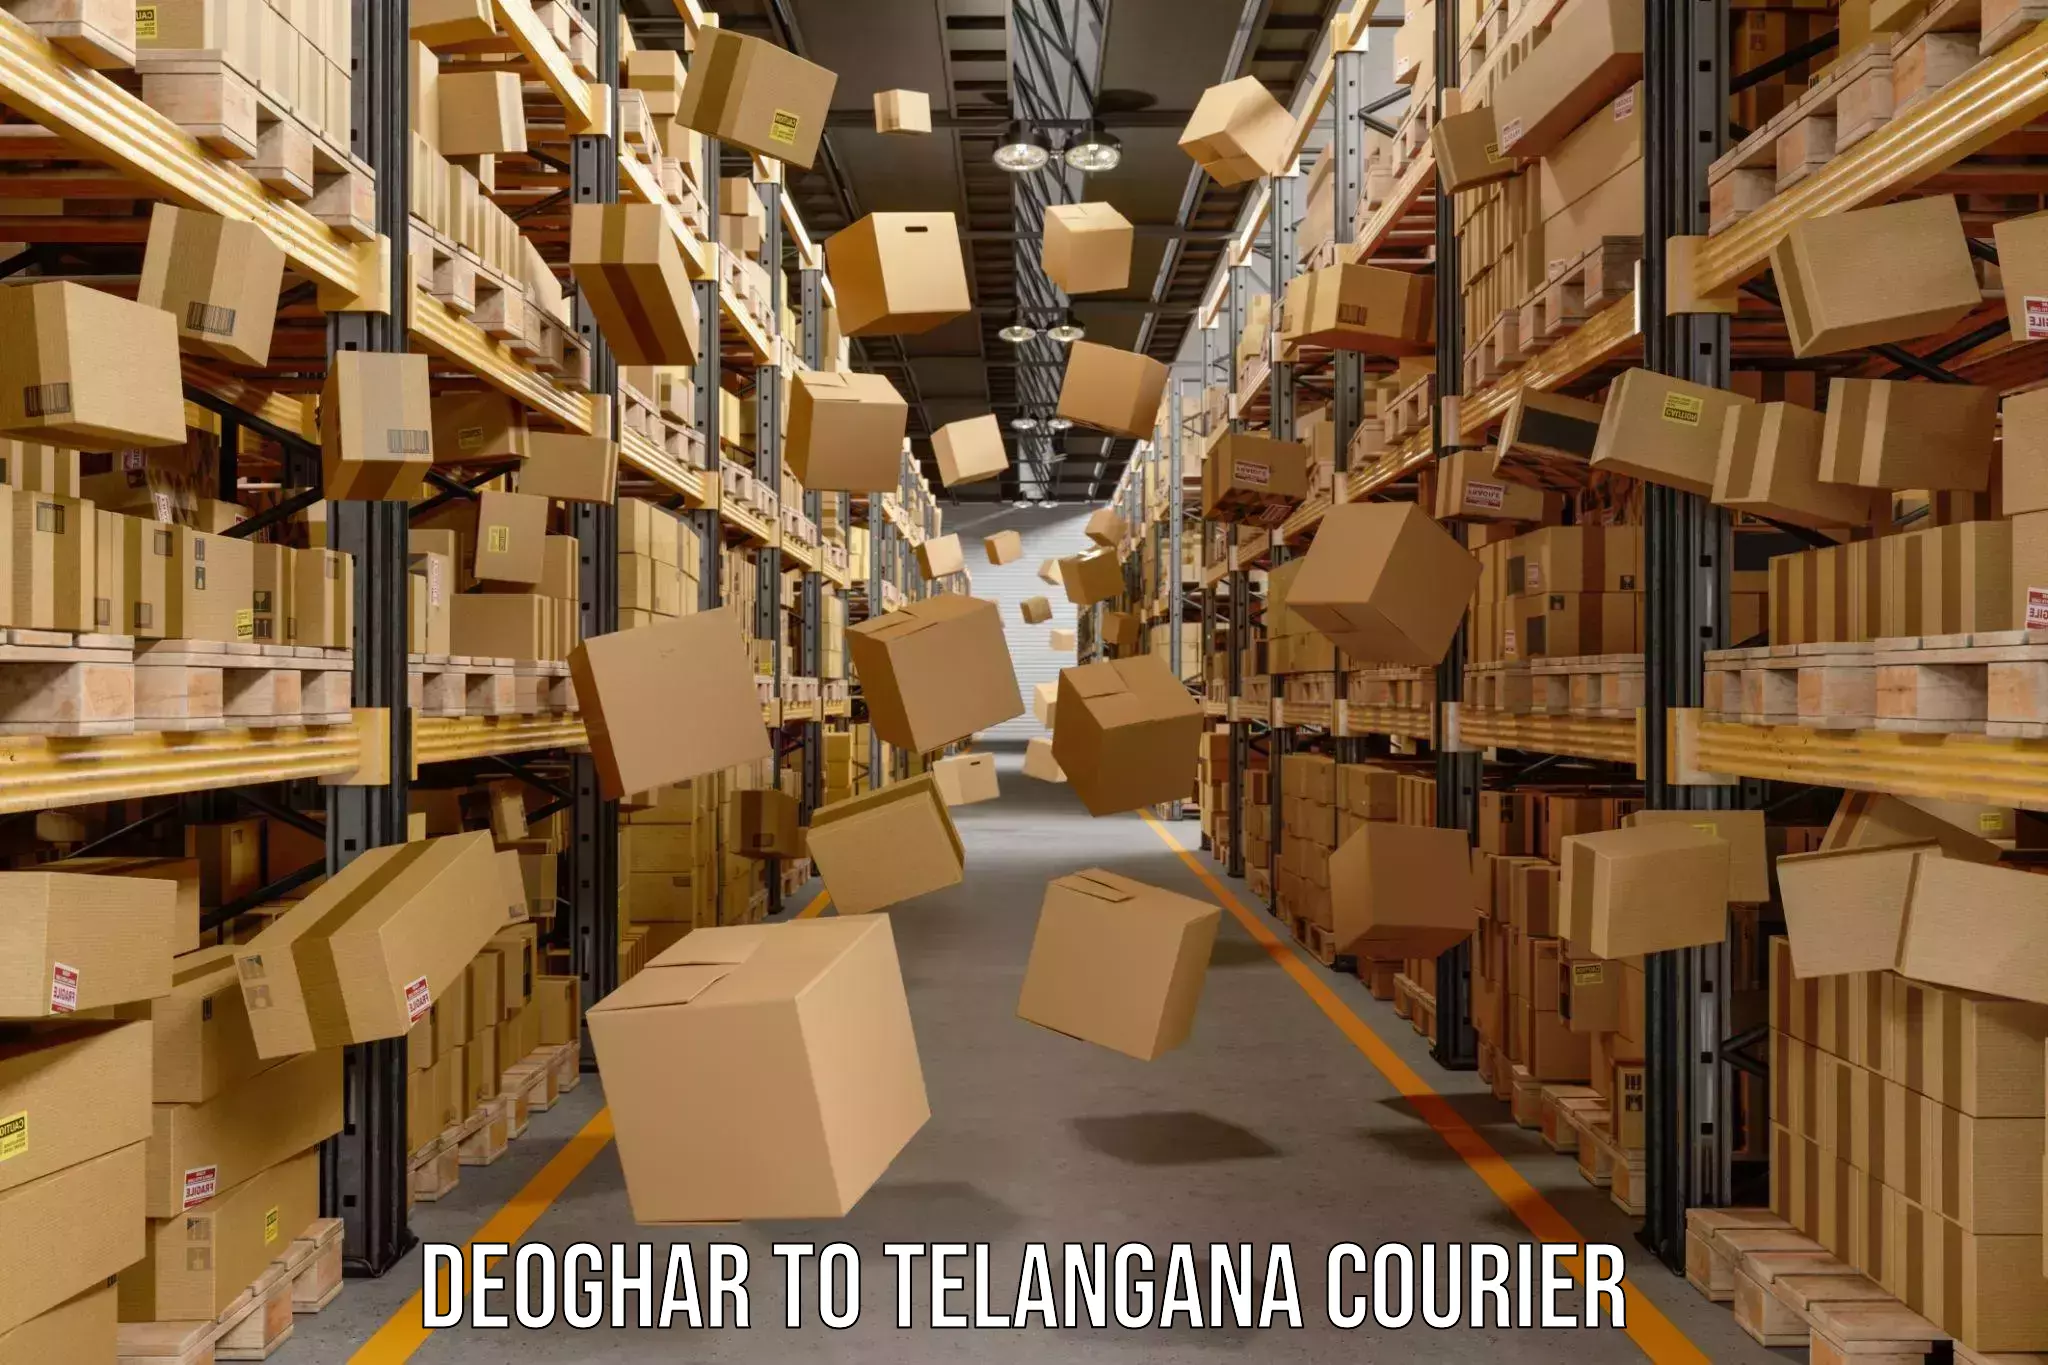 Comprehensive shipping network Deoghar to Sultanabad